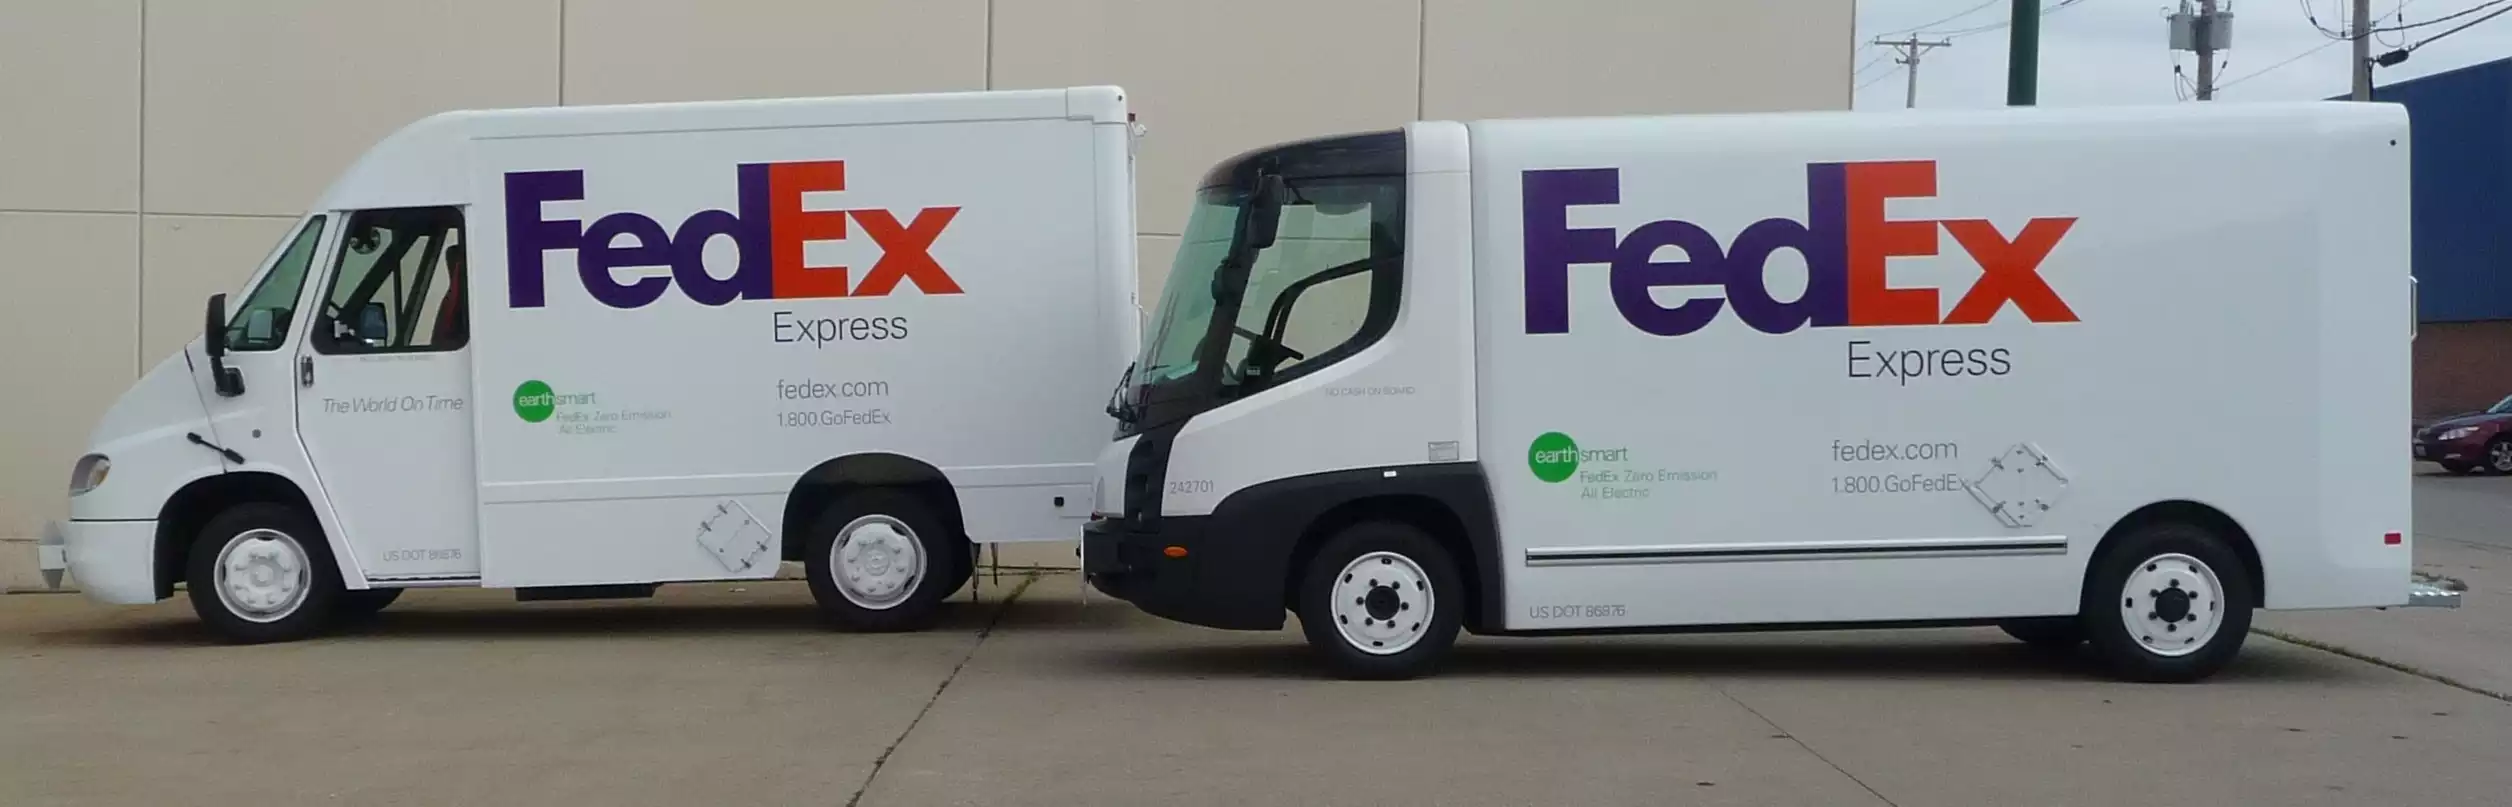 FedEx Adds More Than 4,000 New, Fuel Efficient Vehicles